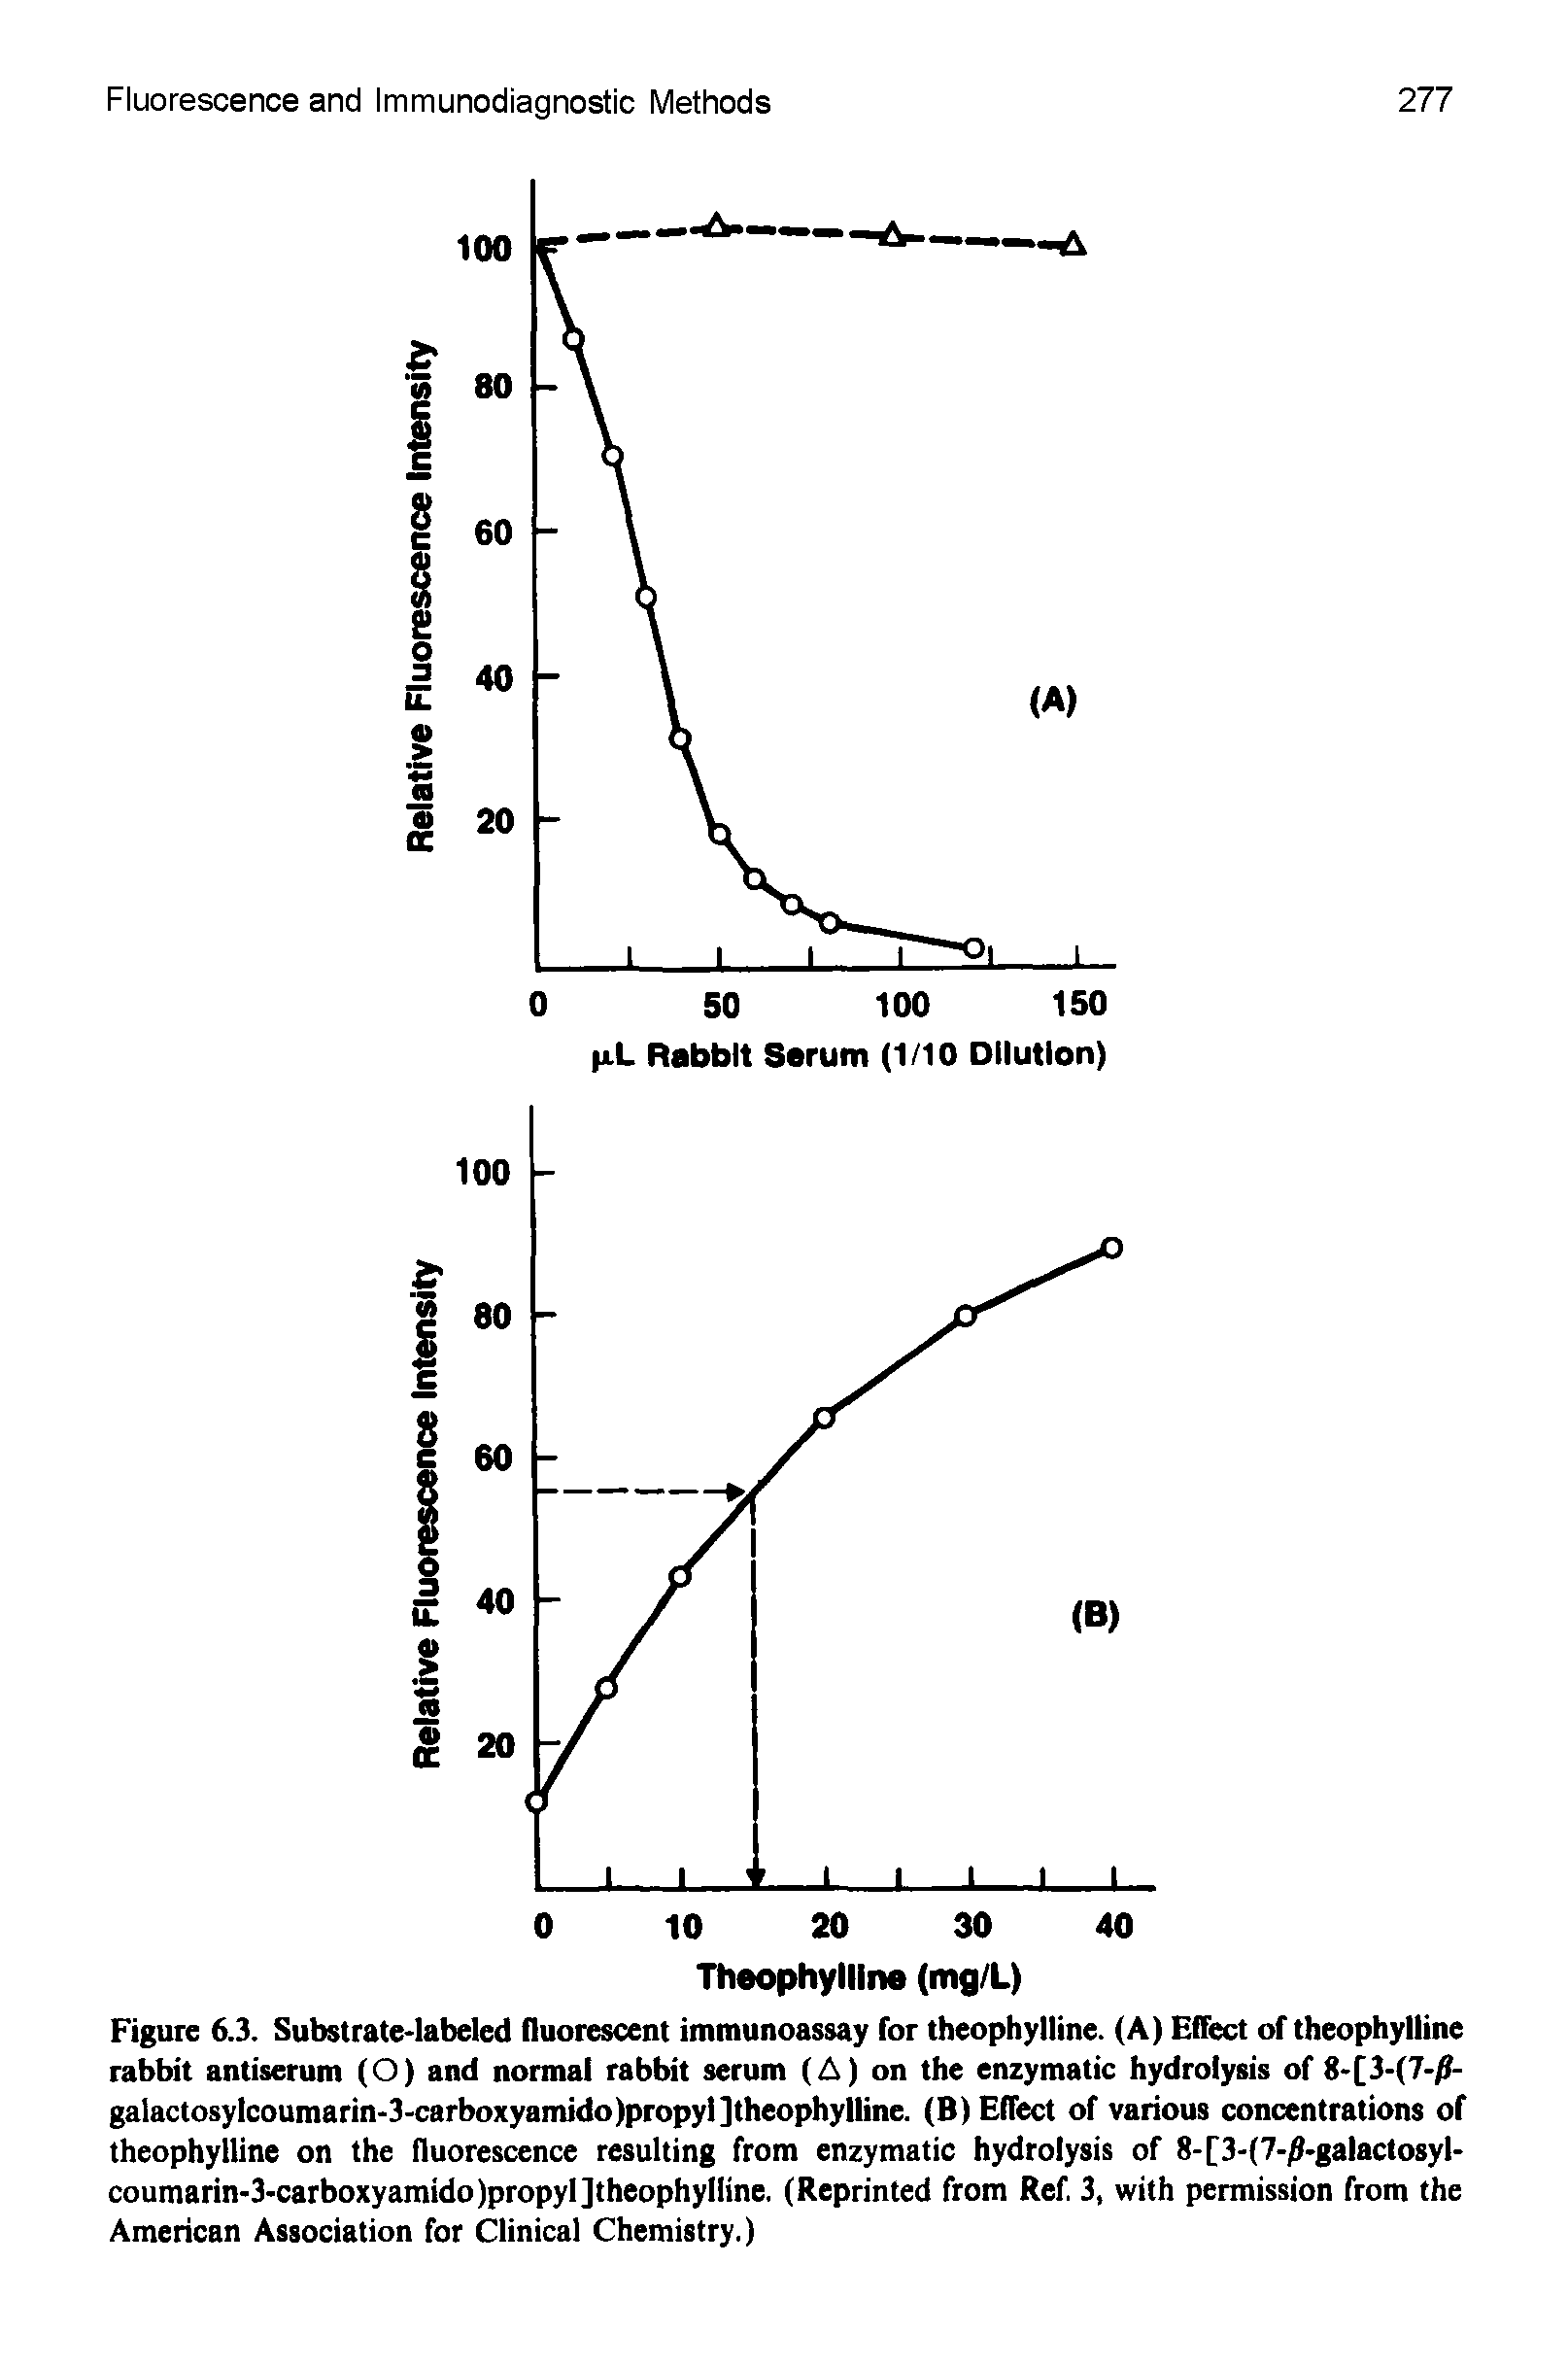 Figure 6.3. Substrate-labeled fluorescent immunoassay for theophylline. (A) Effect of theophylline rabbit antiserum (O) and normal rabbit serum (A) on the enzymatic hydrolysis of 8-[3-(7-/l-galactosylcoumarin-3-carboxyamido)propyl]theophylline. (B) Effect of various concentrations of theophylline on the fluorescence resulting from enzymatic hydrolysis of 8-[3-(7-/)-galactosyl-coumarin-3-carboxyamido)propyI]theophylline. (Reprinted from Ref. 3, with permission from the American Association for Clinical Chemistry.)...